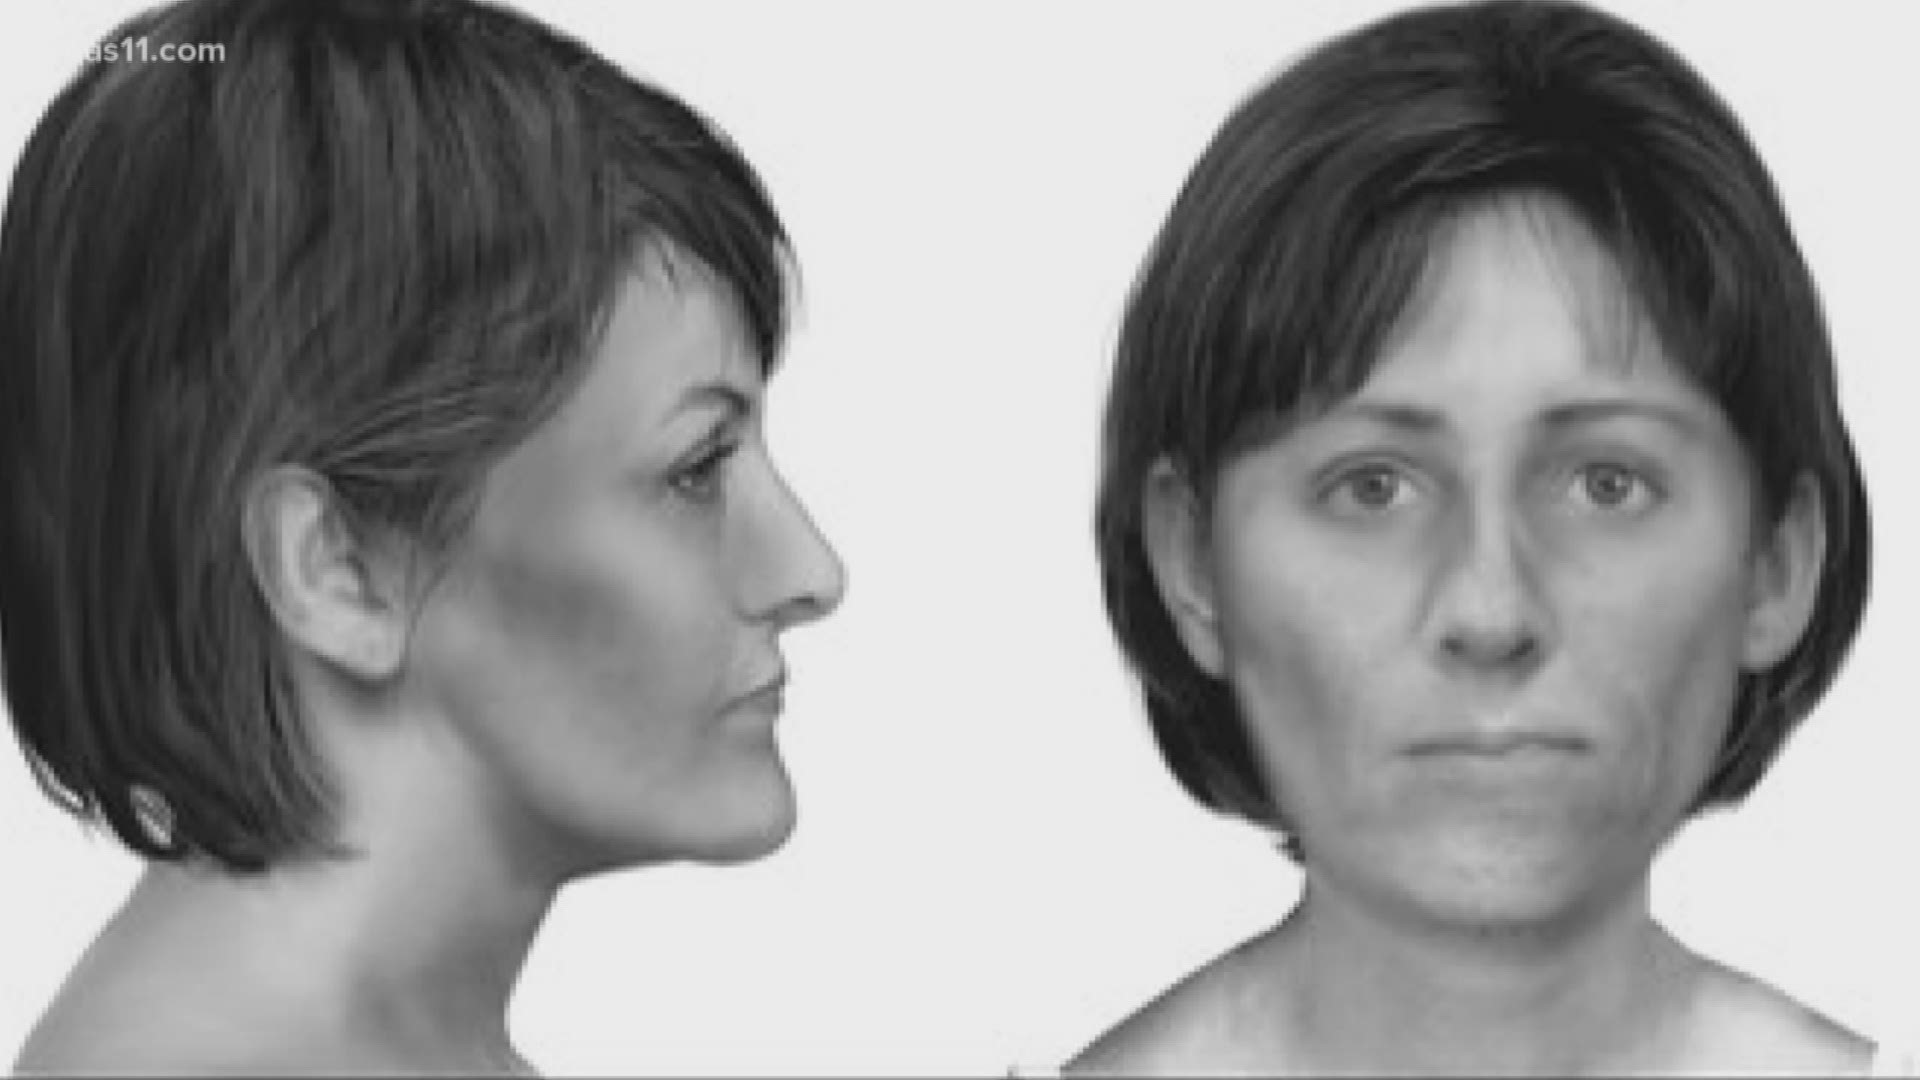 Investigators believe the Owen County Jane Doe may have ties to Columbus, Ohio and/or Miami, Florida.